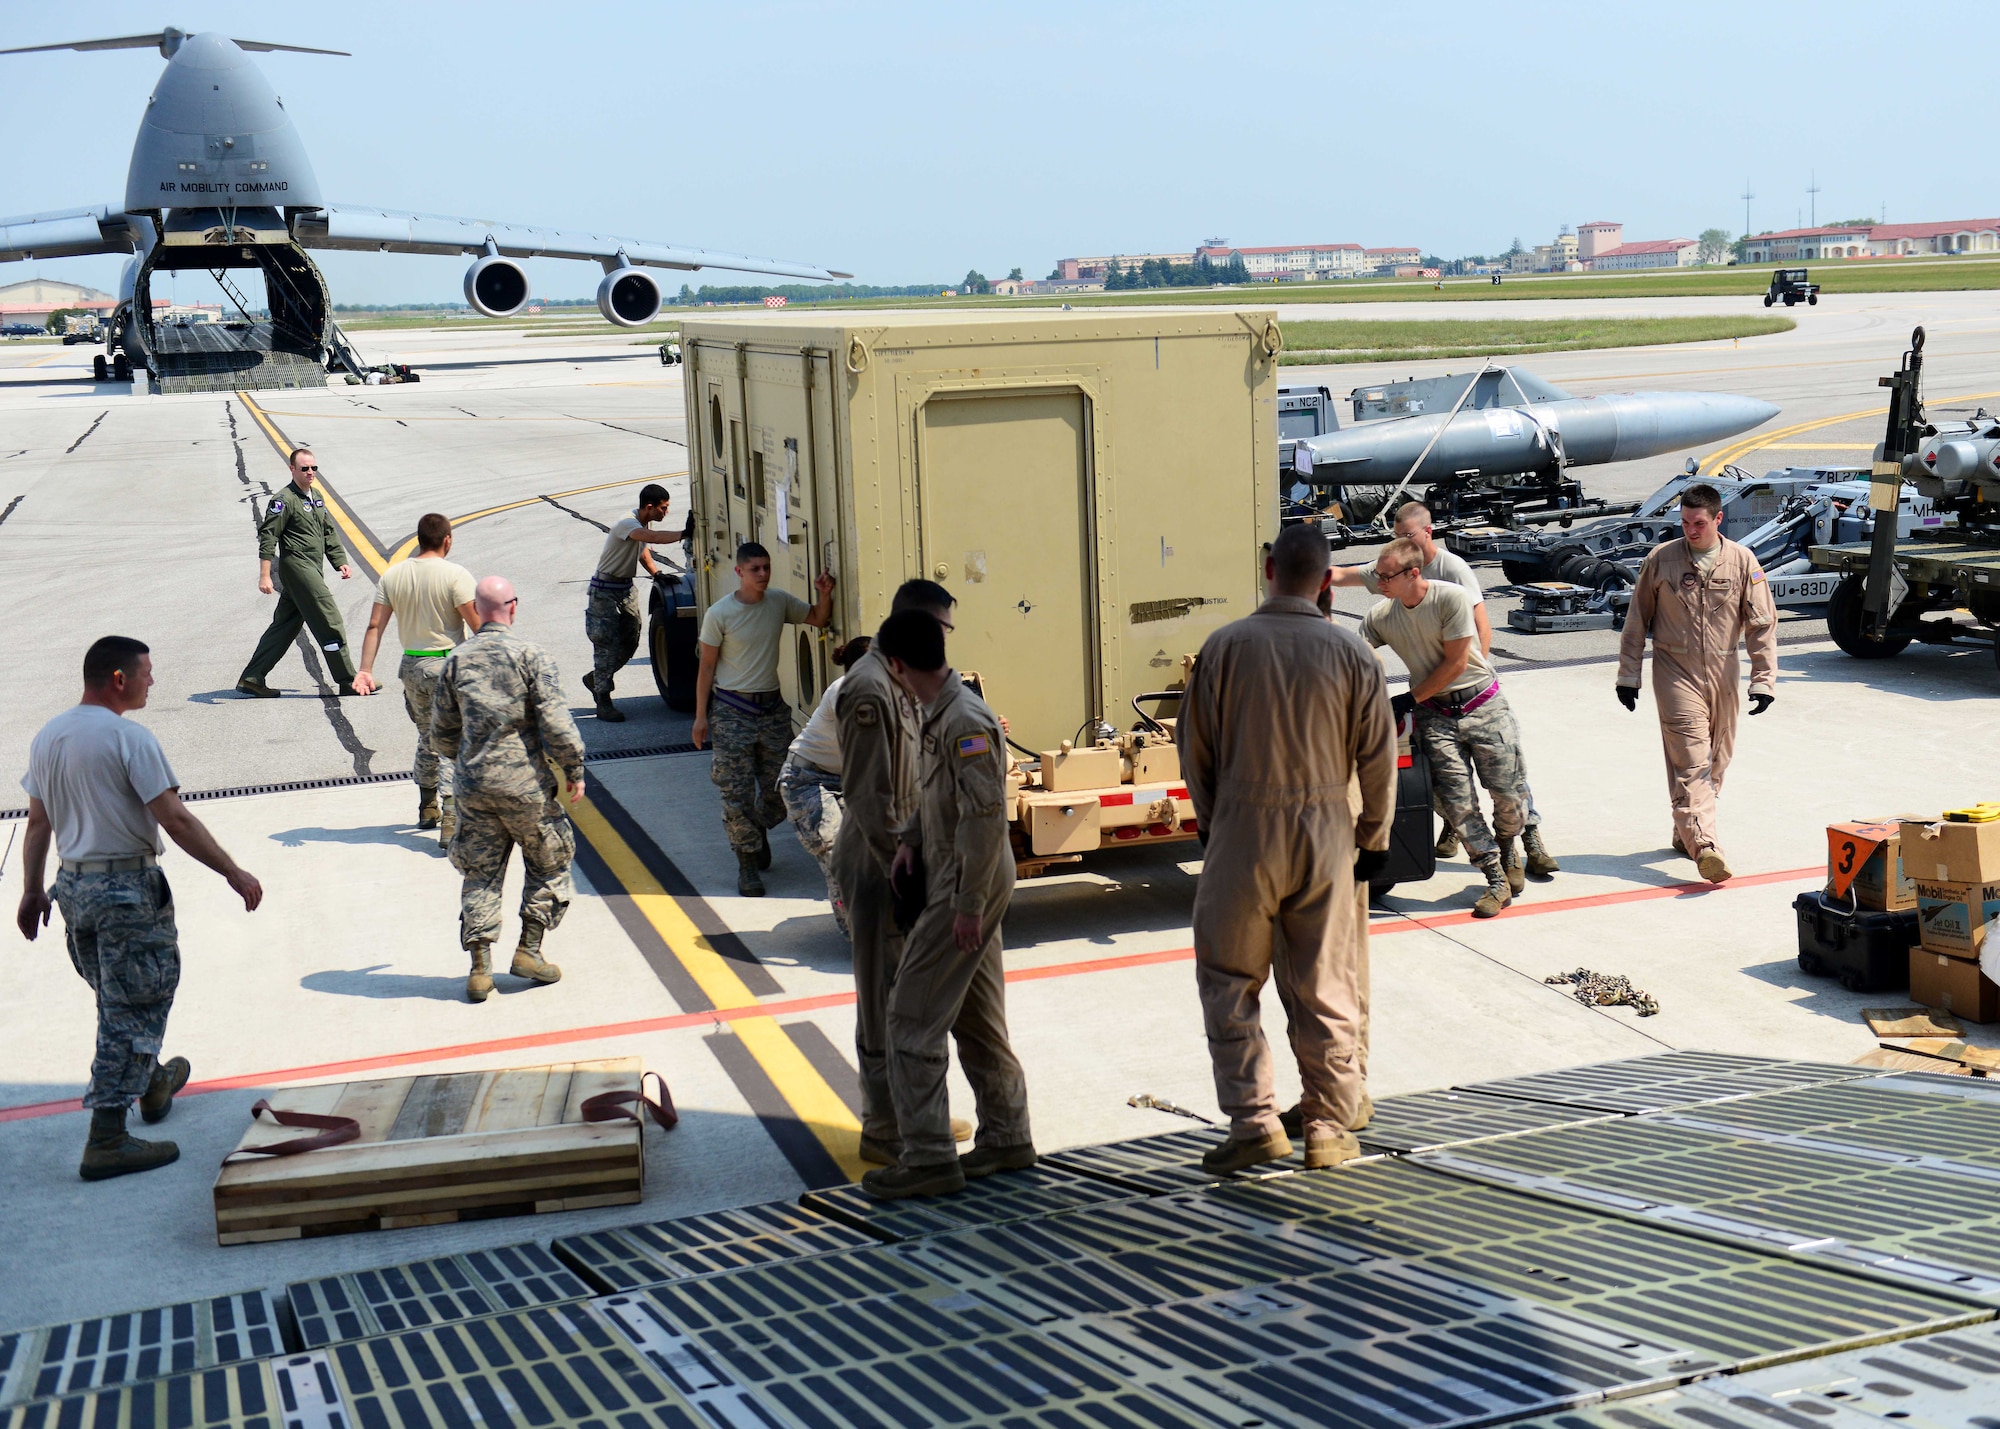 Airmen from the 436th Airlift Wing and 724th Air Mobility Squadron load cargo onto a C-5 Super Galaxy in support of Operation Inherent Resolve Aug. 8, 2015, at Aviano Air Base, Italy. This deployment coincides with Turkey's decision to host U.S. aircraft to conduct counter-ISIL operations. (U.S. Air Force photo by Airman 1st Class Deana Heitzman)